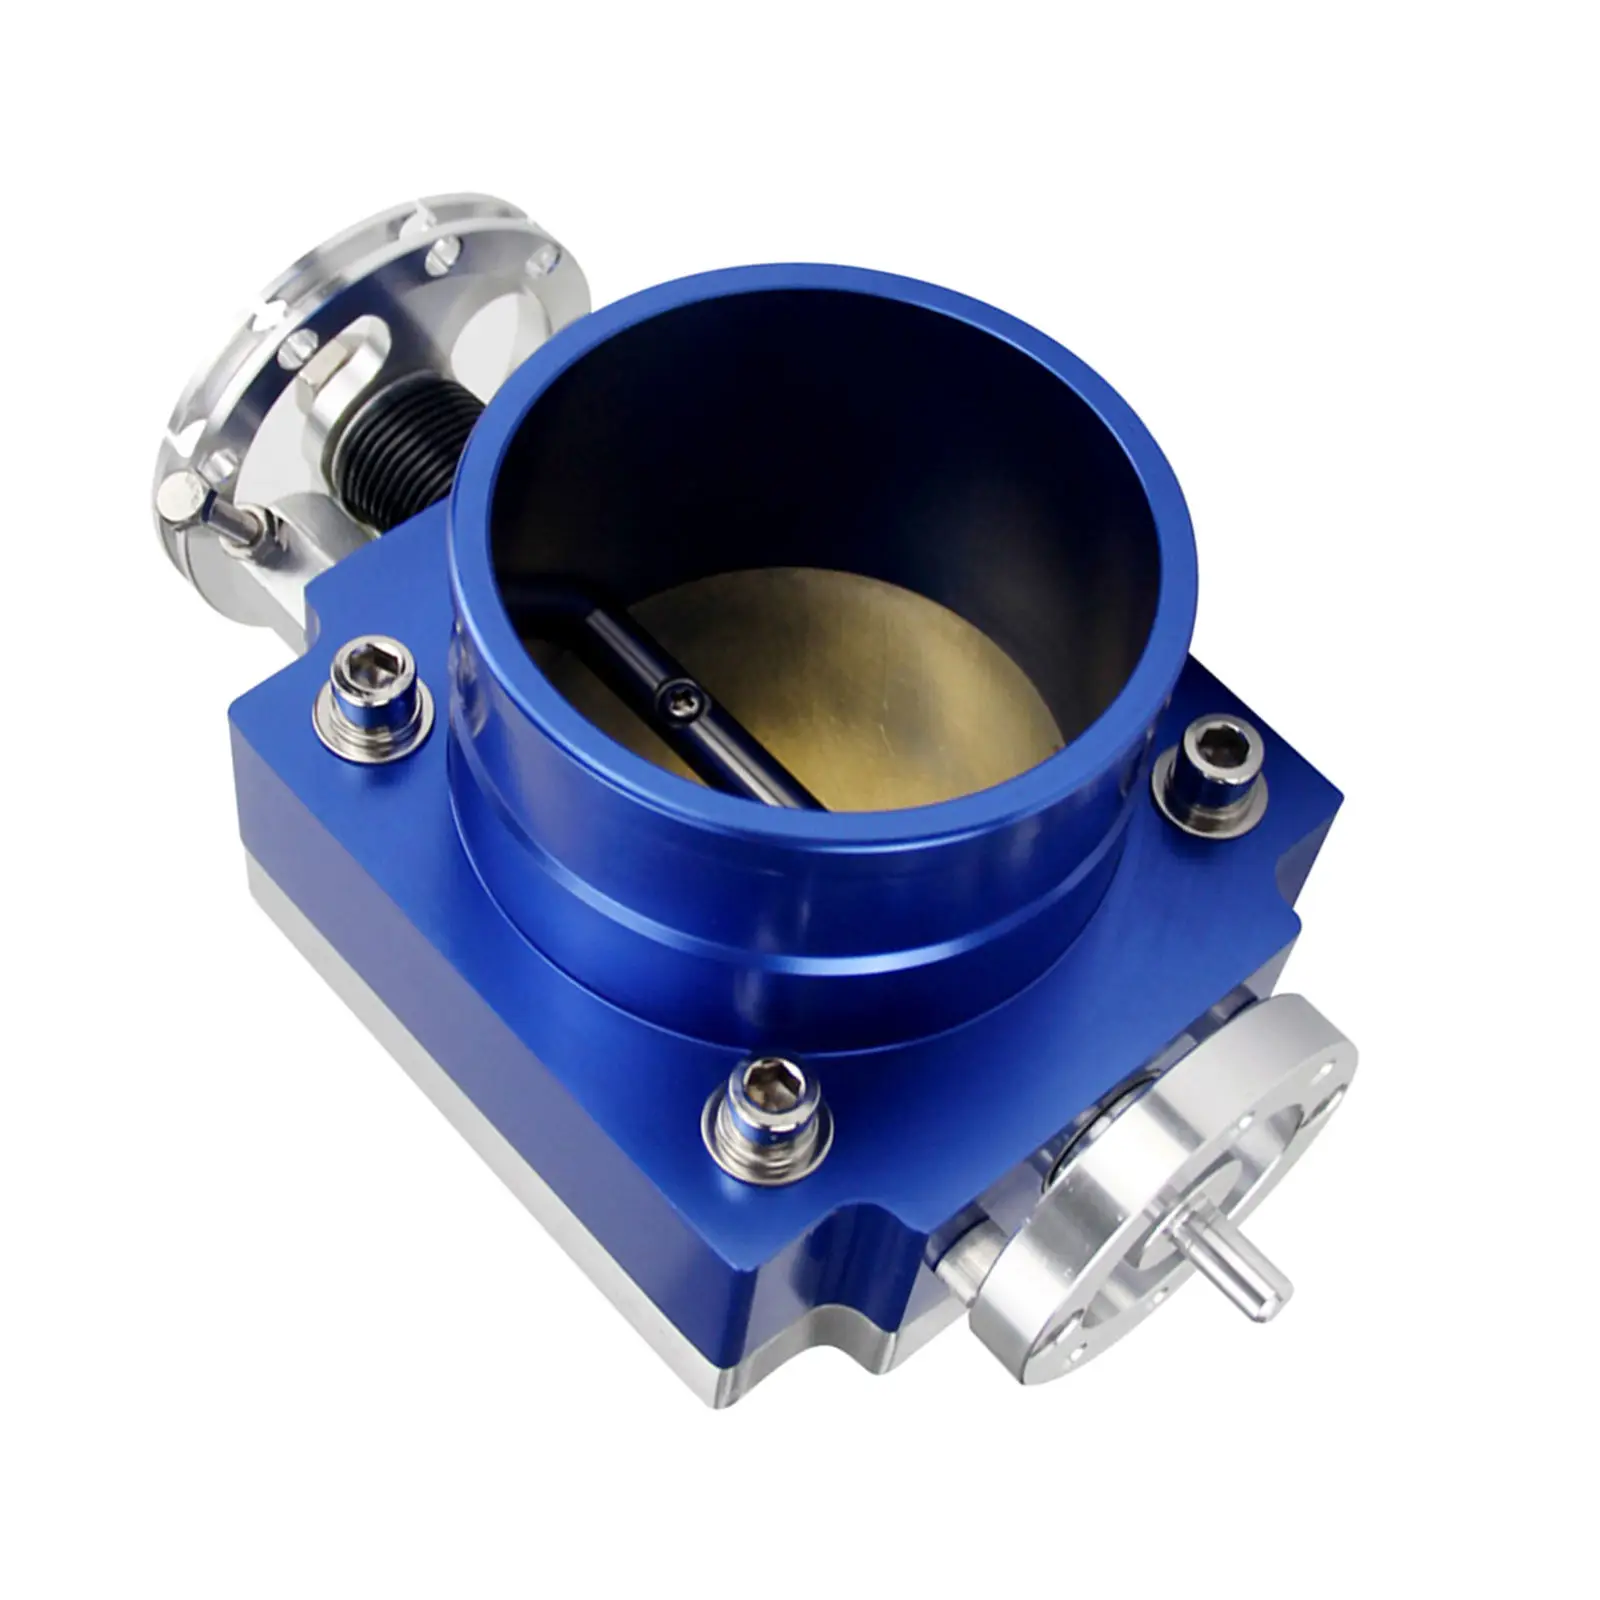 70MM Throttle Body Performance CNC Aluminum Intake Manifold Billet High Flow Fits for  Q45 TPS PQY6970